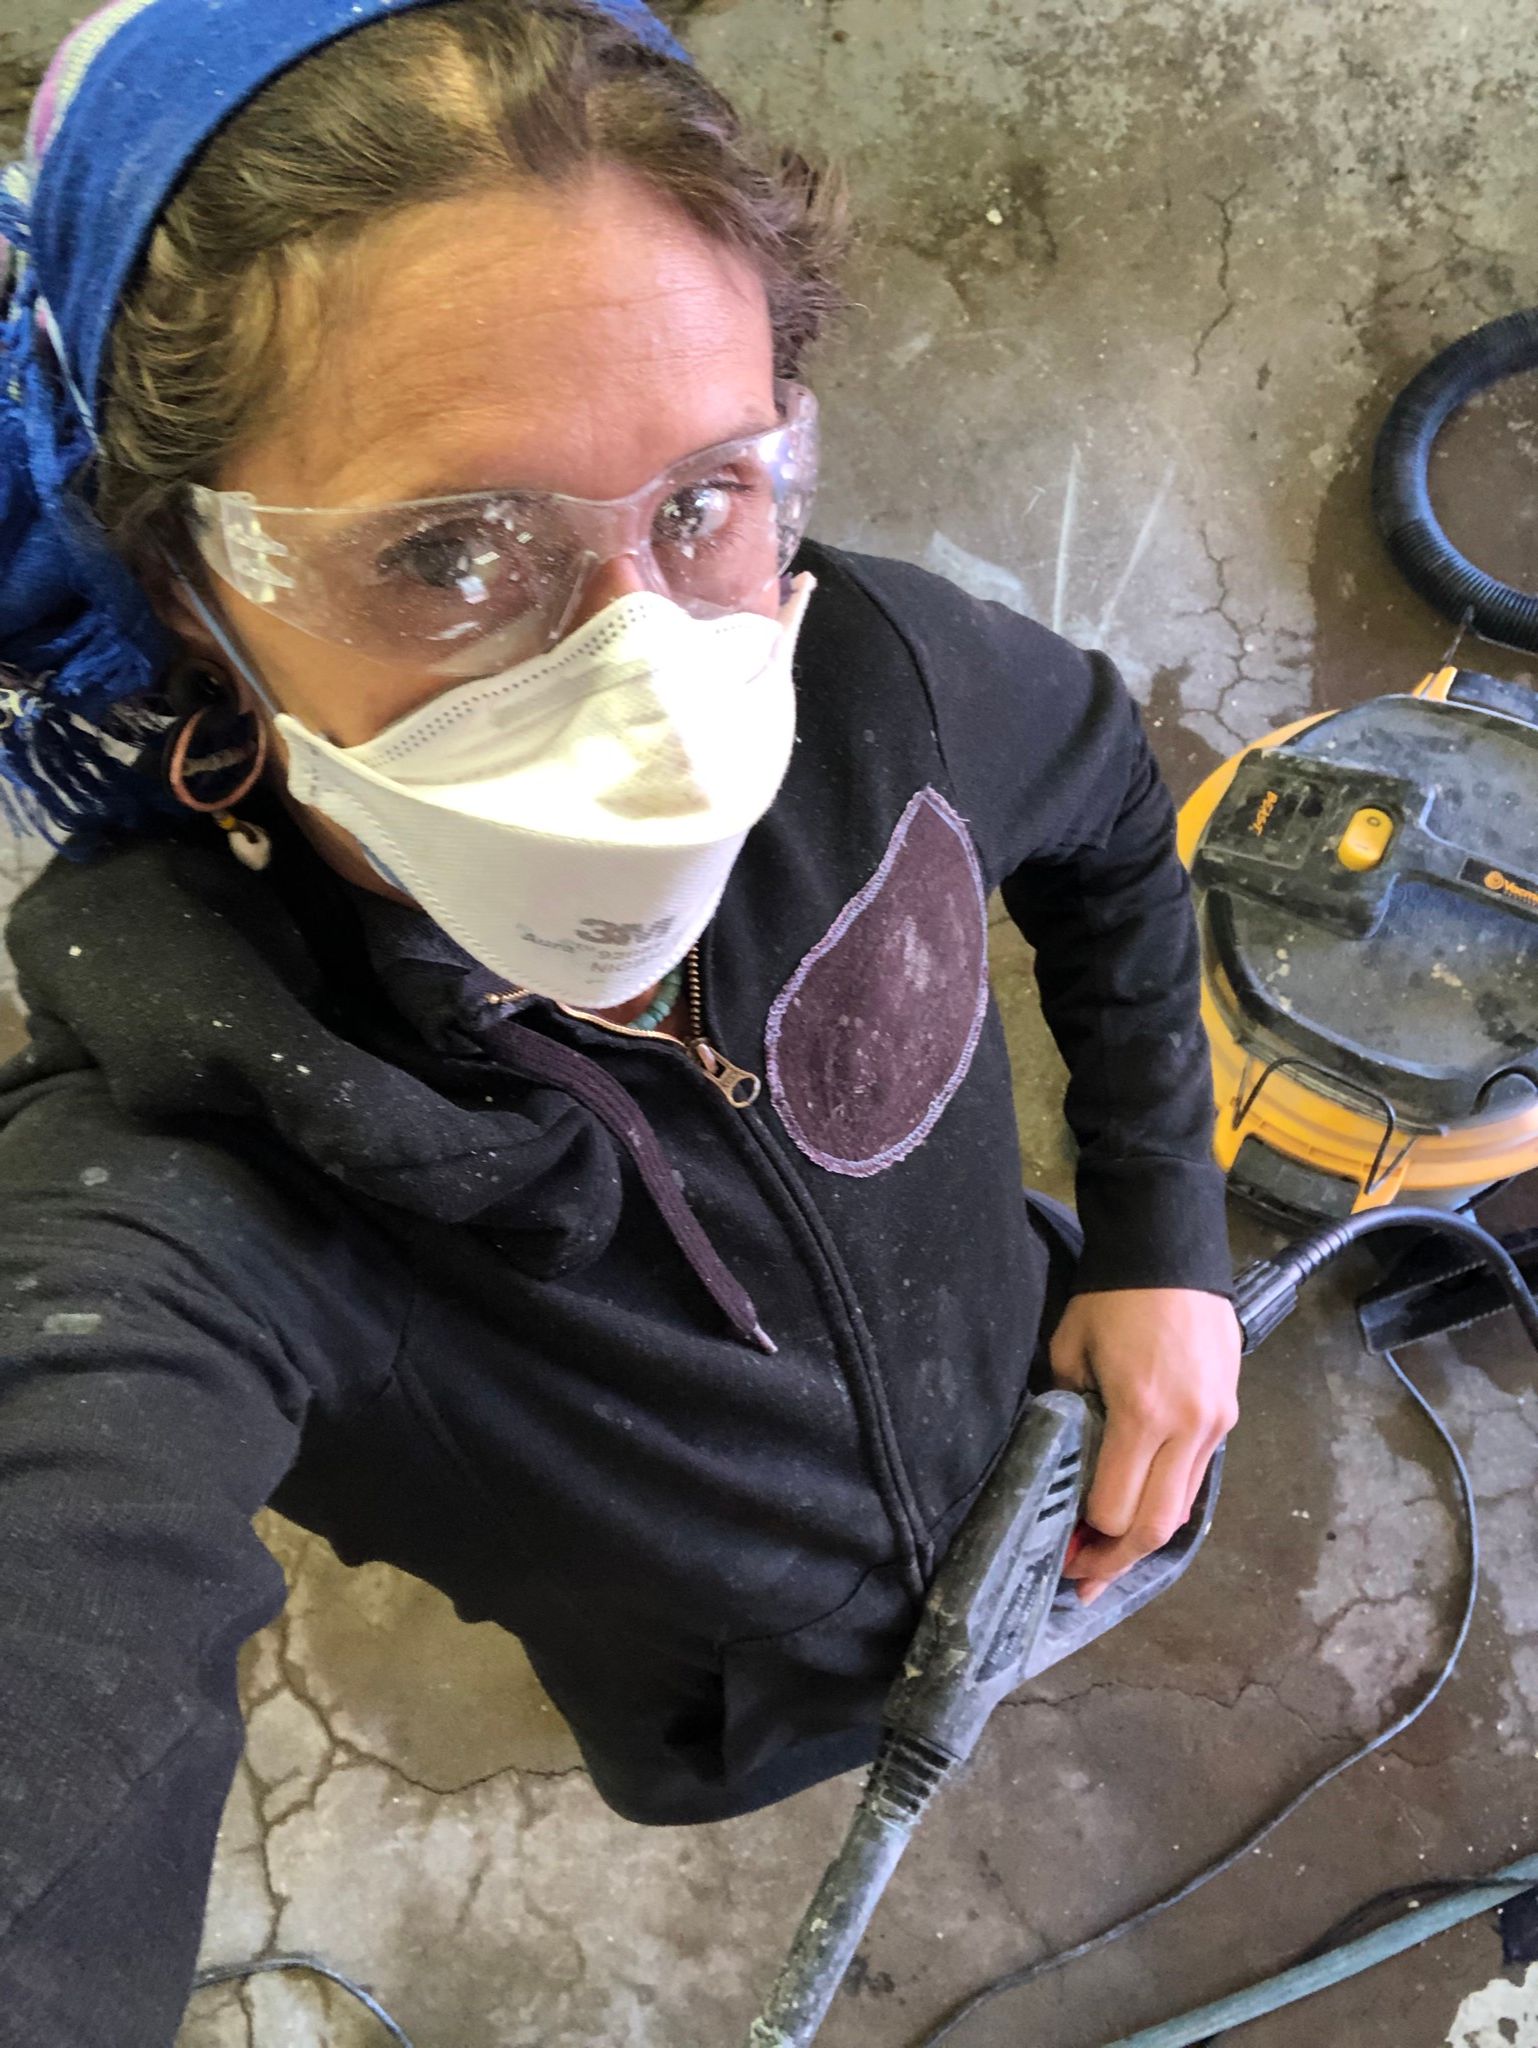 a view from above of a woman wearing ppe of a facemark, goggles and a blue headscarf. she holds a power washer in one hand and is covered in white paint.